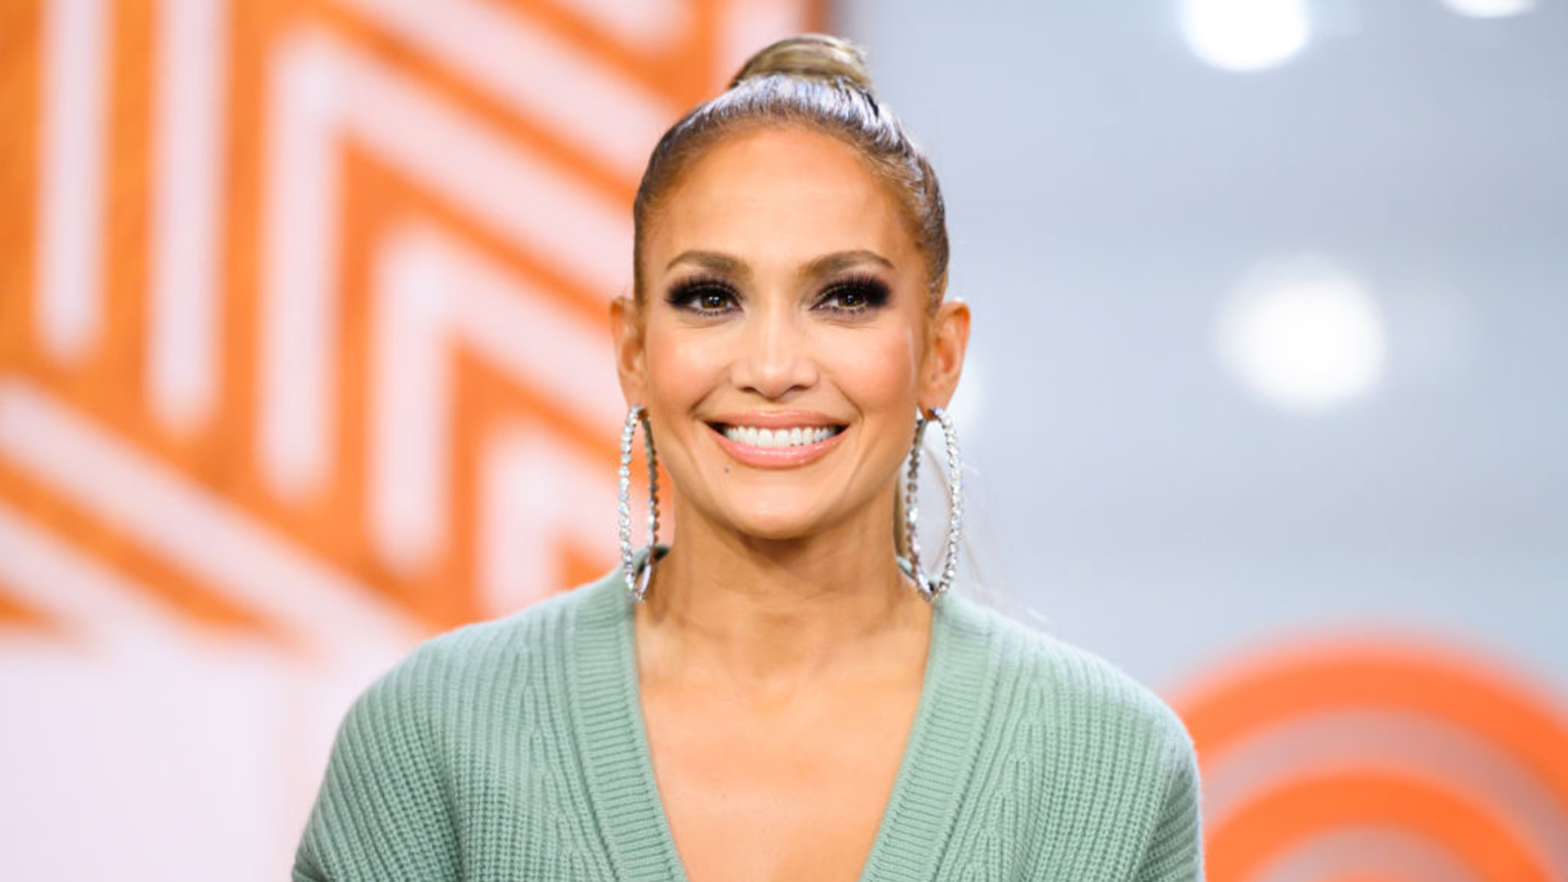 Jennifer Lopez Stands With $14B Loan Program To Help Latina Entrepreneurs Gain Access To Capital